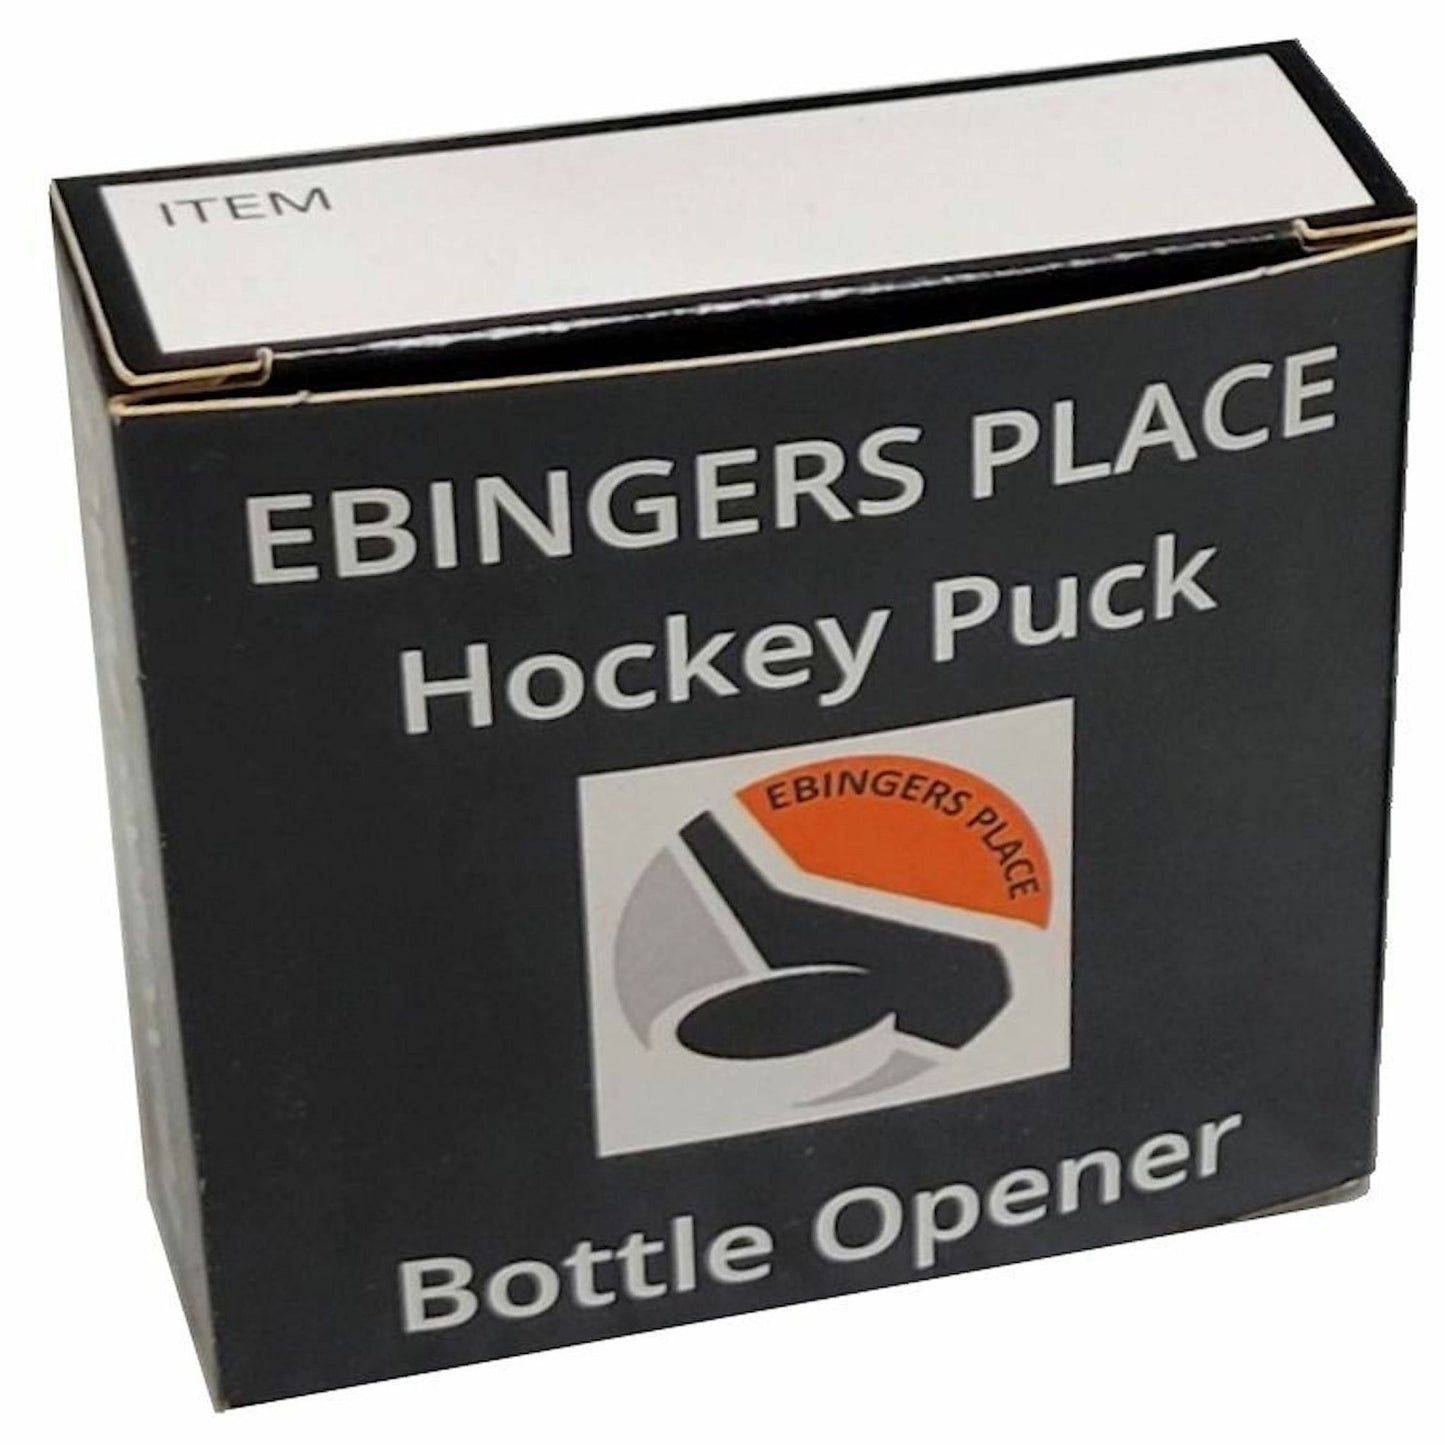 Out Of Print Calgary Flames Basic Series Hockey Puck Bottle Opener